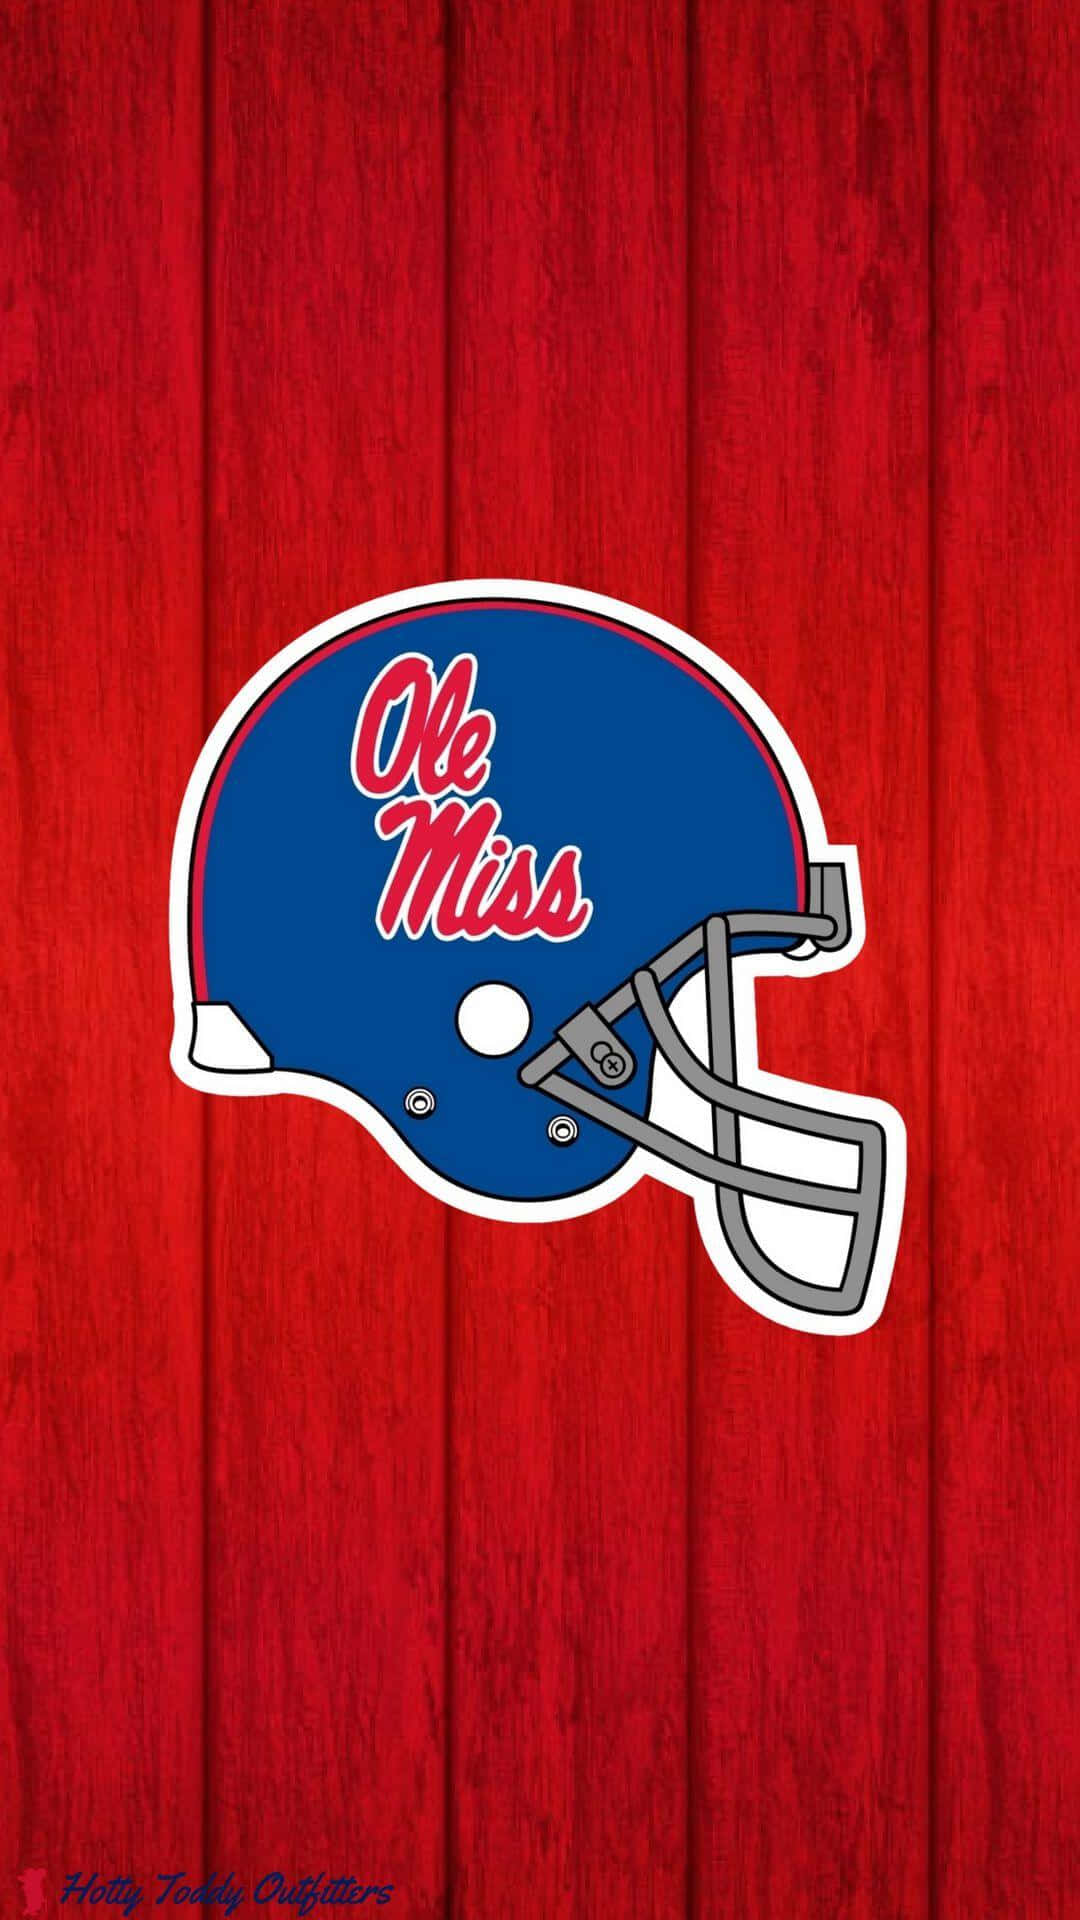 Ole Miss Football on Twitter Couldnt pick one so you decide  WallpaperWednesday  HottyToddy httpstcooLgjNDrMIf  Twitter